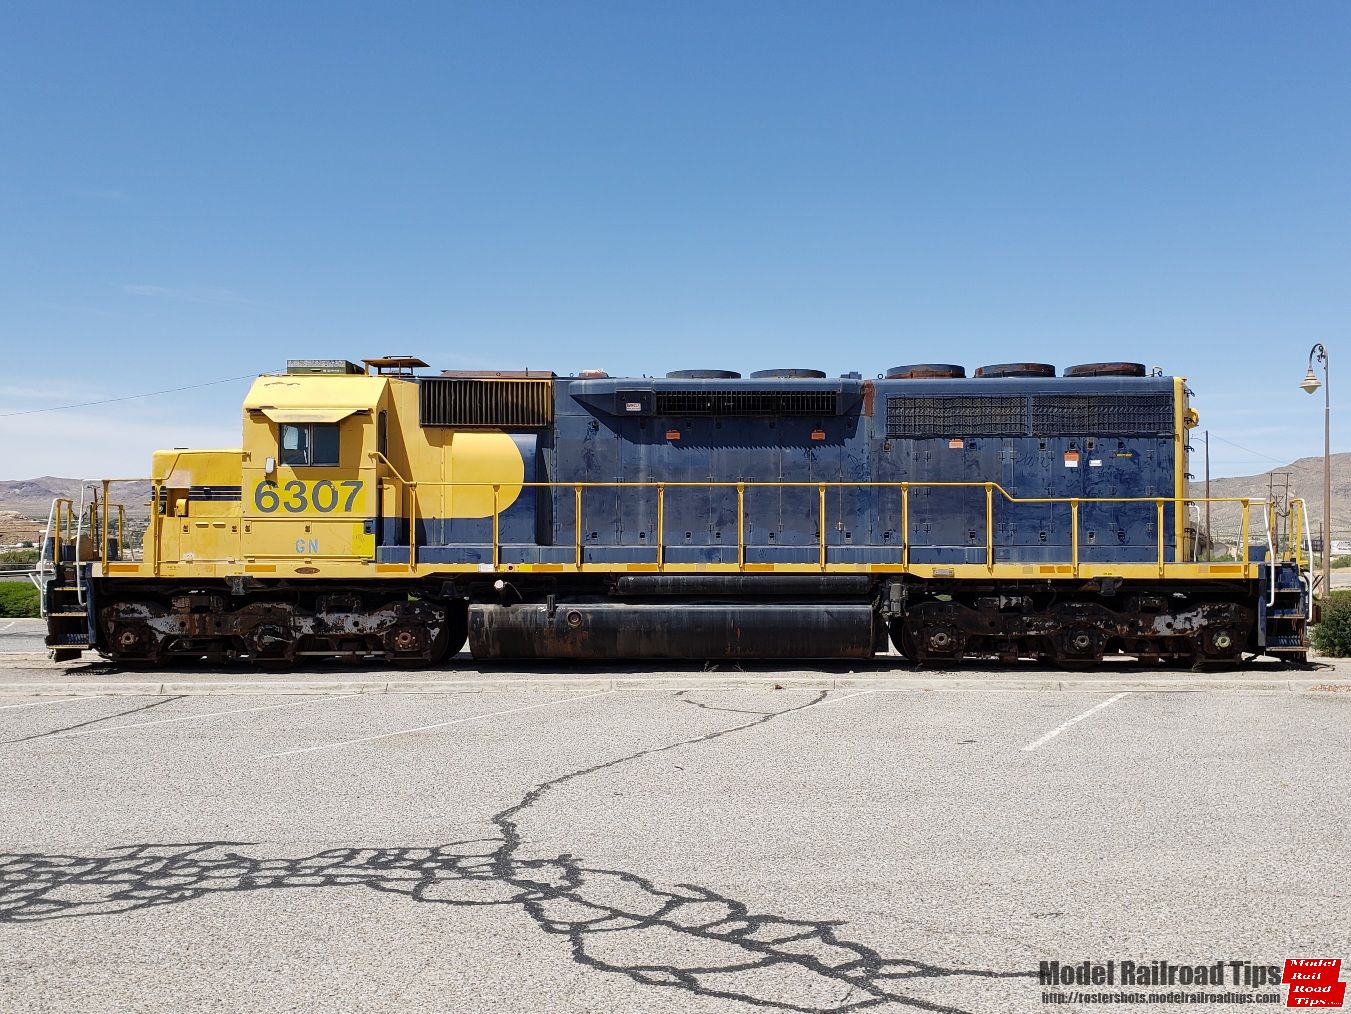 GN (BNSF) 6307
GN 6307
(BNSF uses GN when retiring engines) 
EMD SD39
22 May 2020
Barstow CA 
